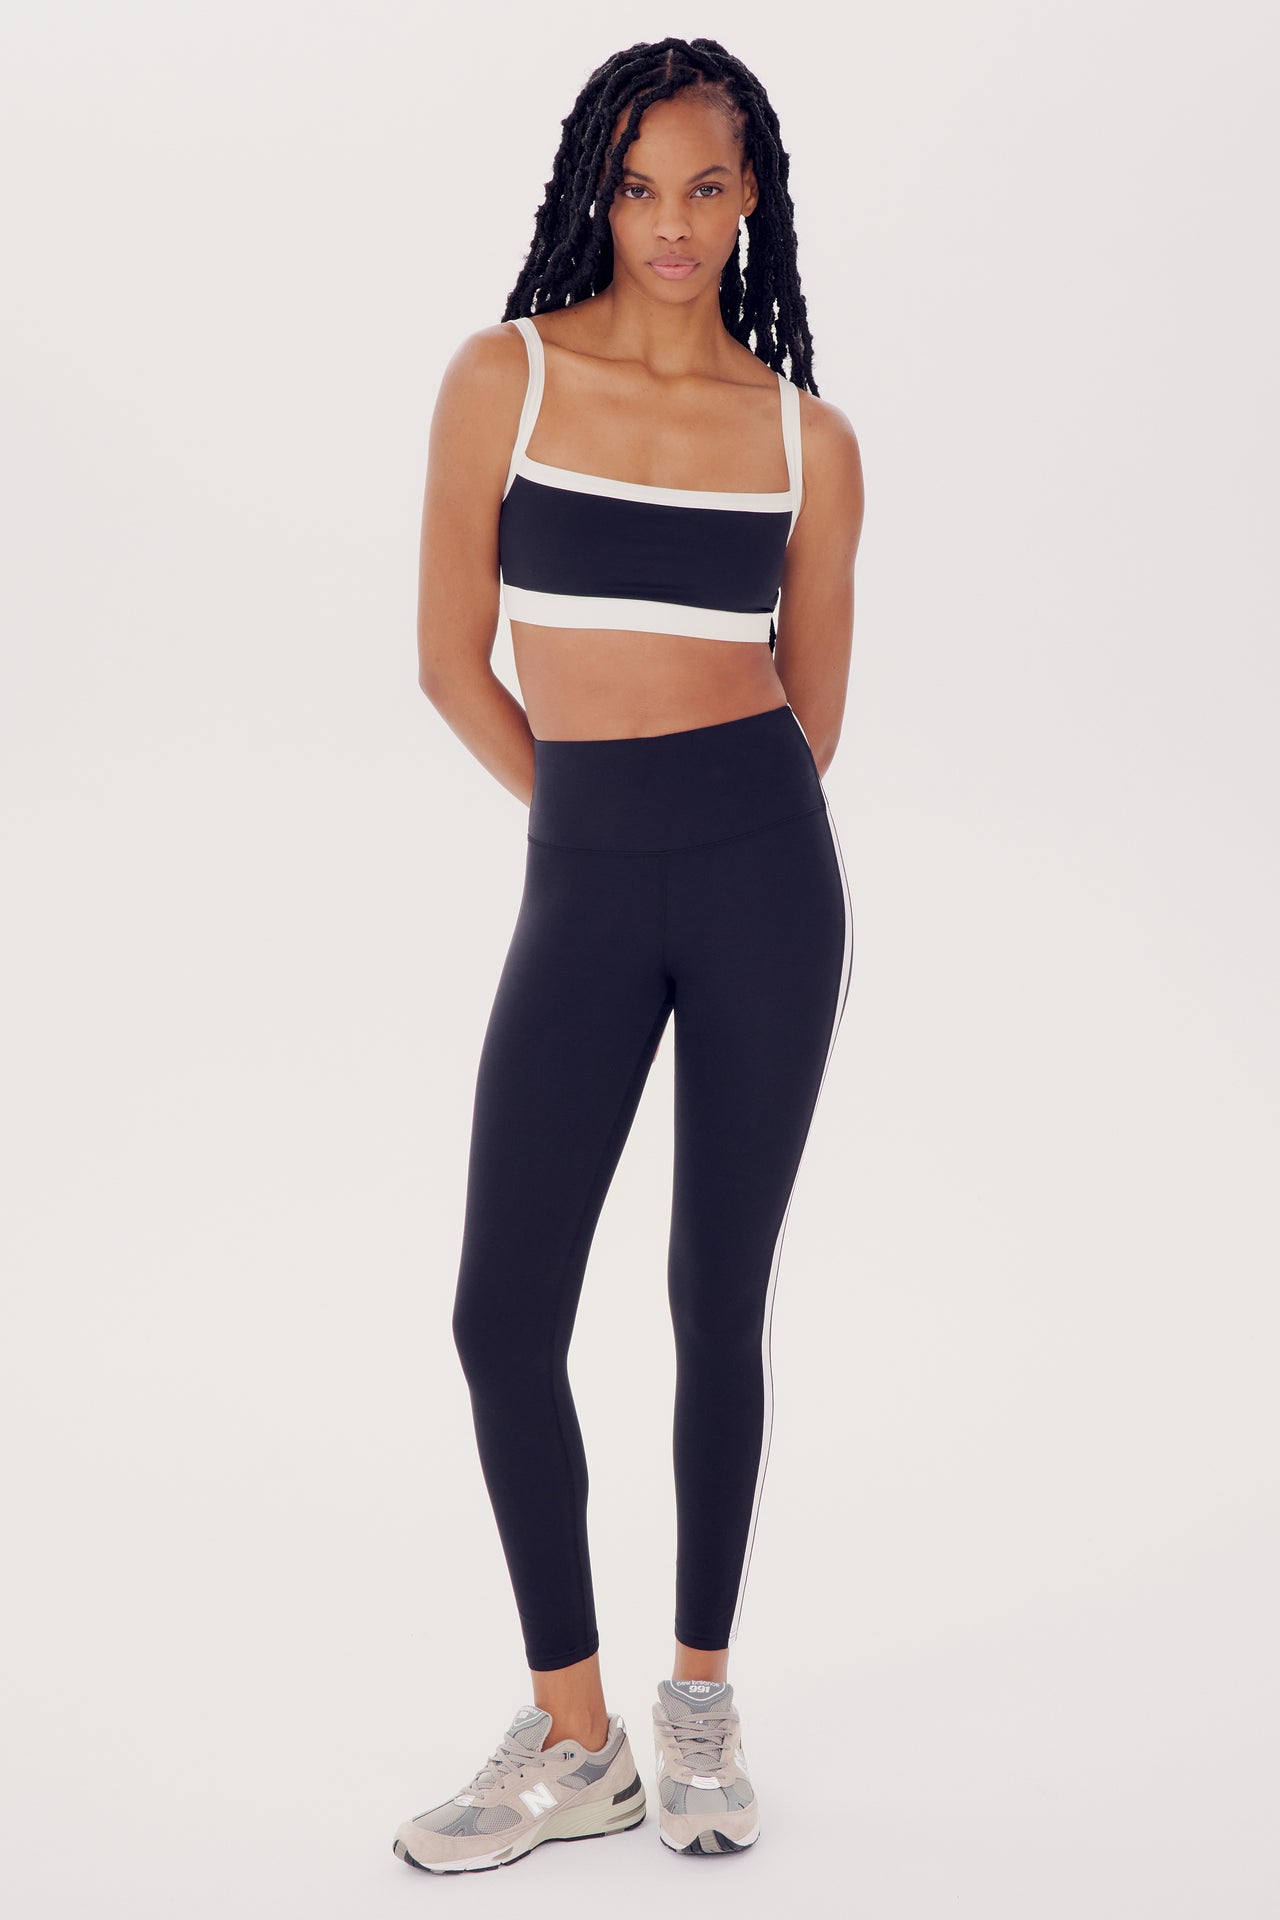 A woman in a sporty, sleeveless black top and SPLITS59 Clare High Waist Rigor 7/8 leggings stands confidently, hands by her sides, against a white background.